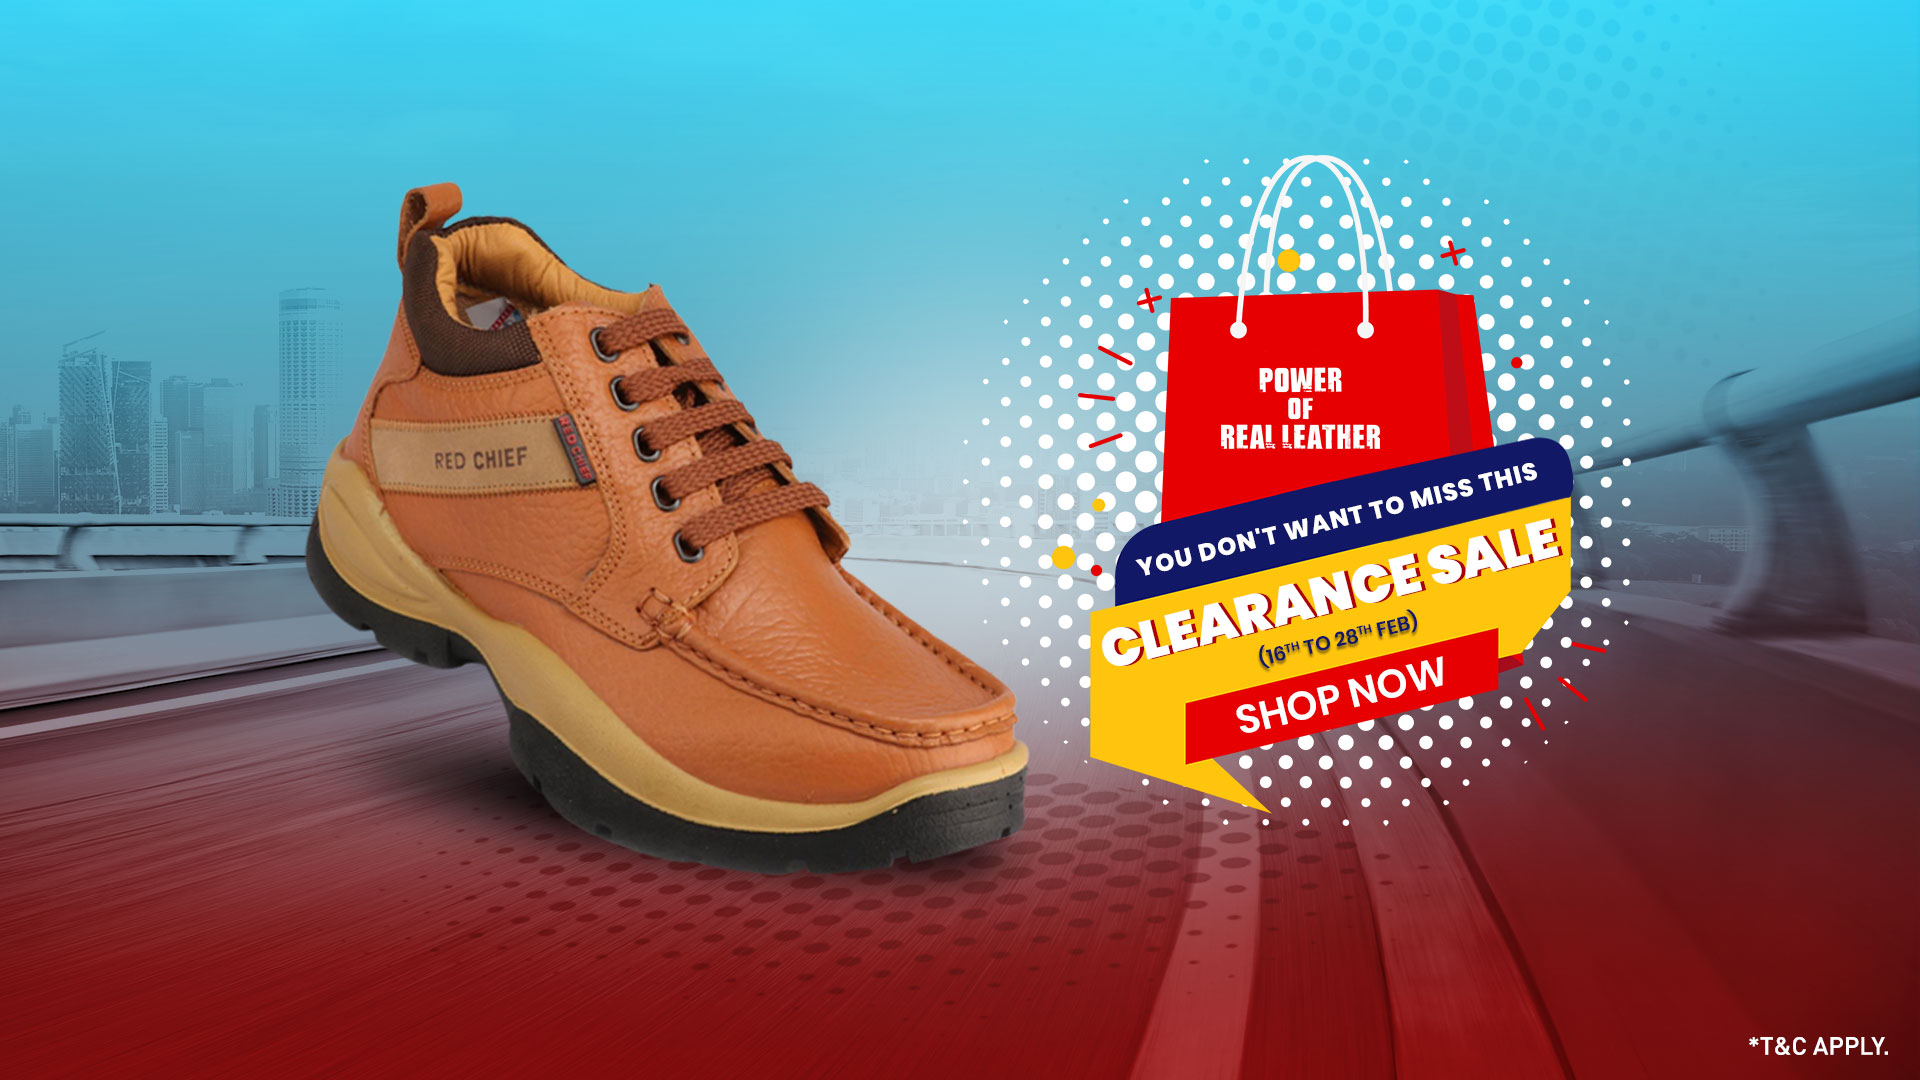 Indian footwear brands - Red Chief